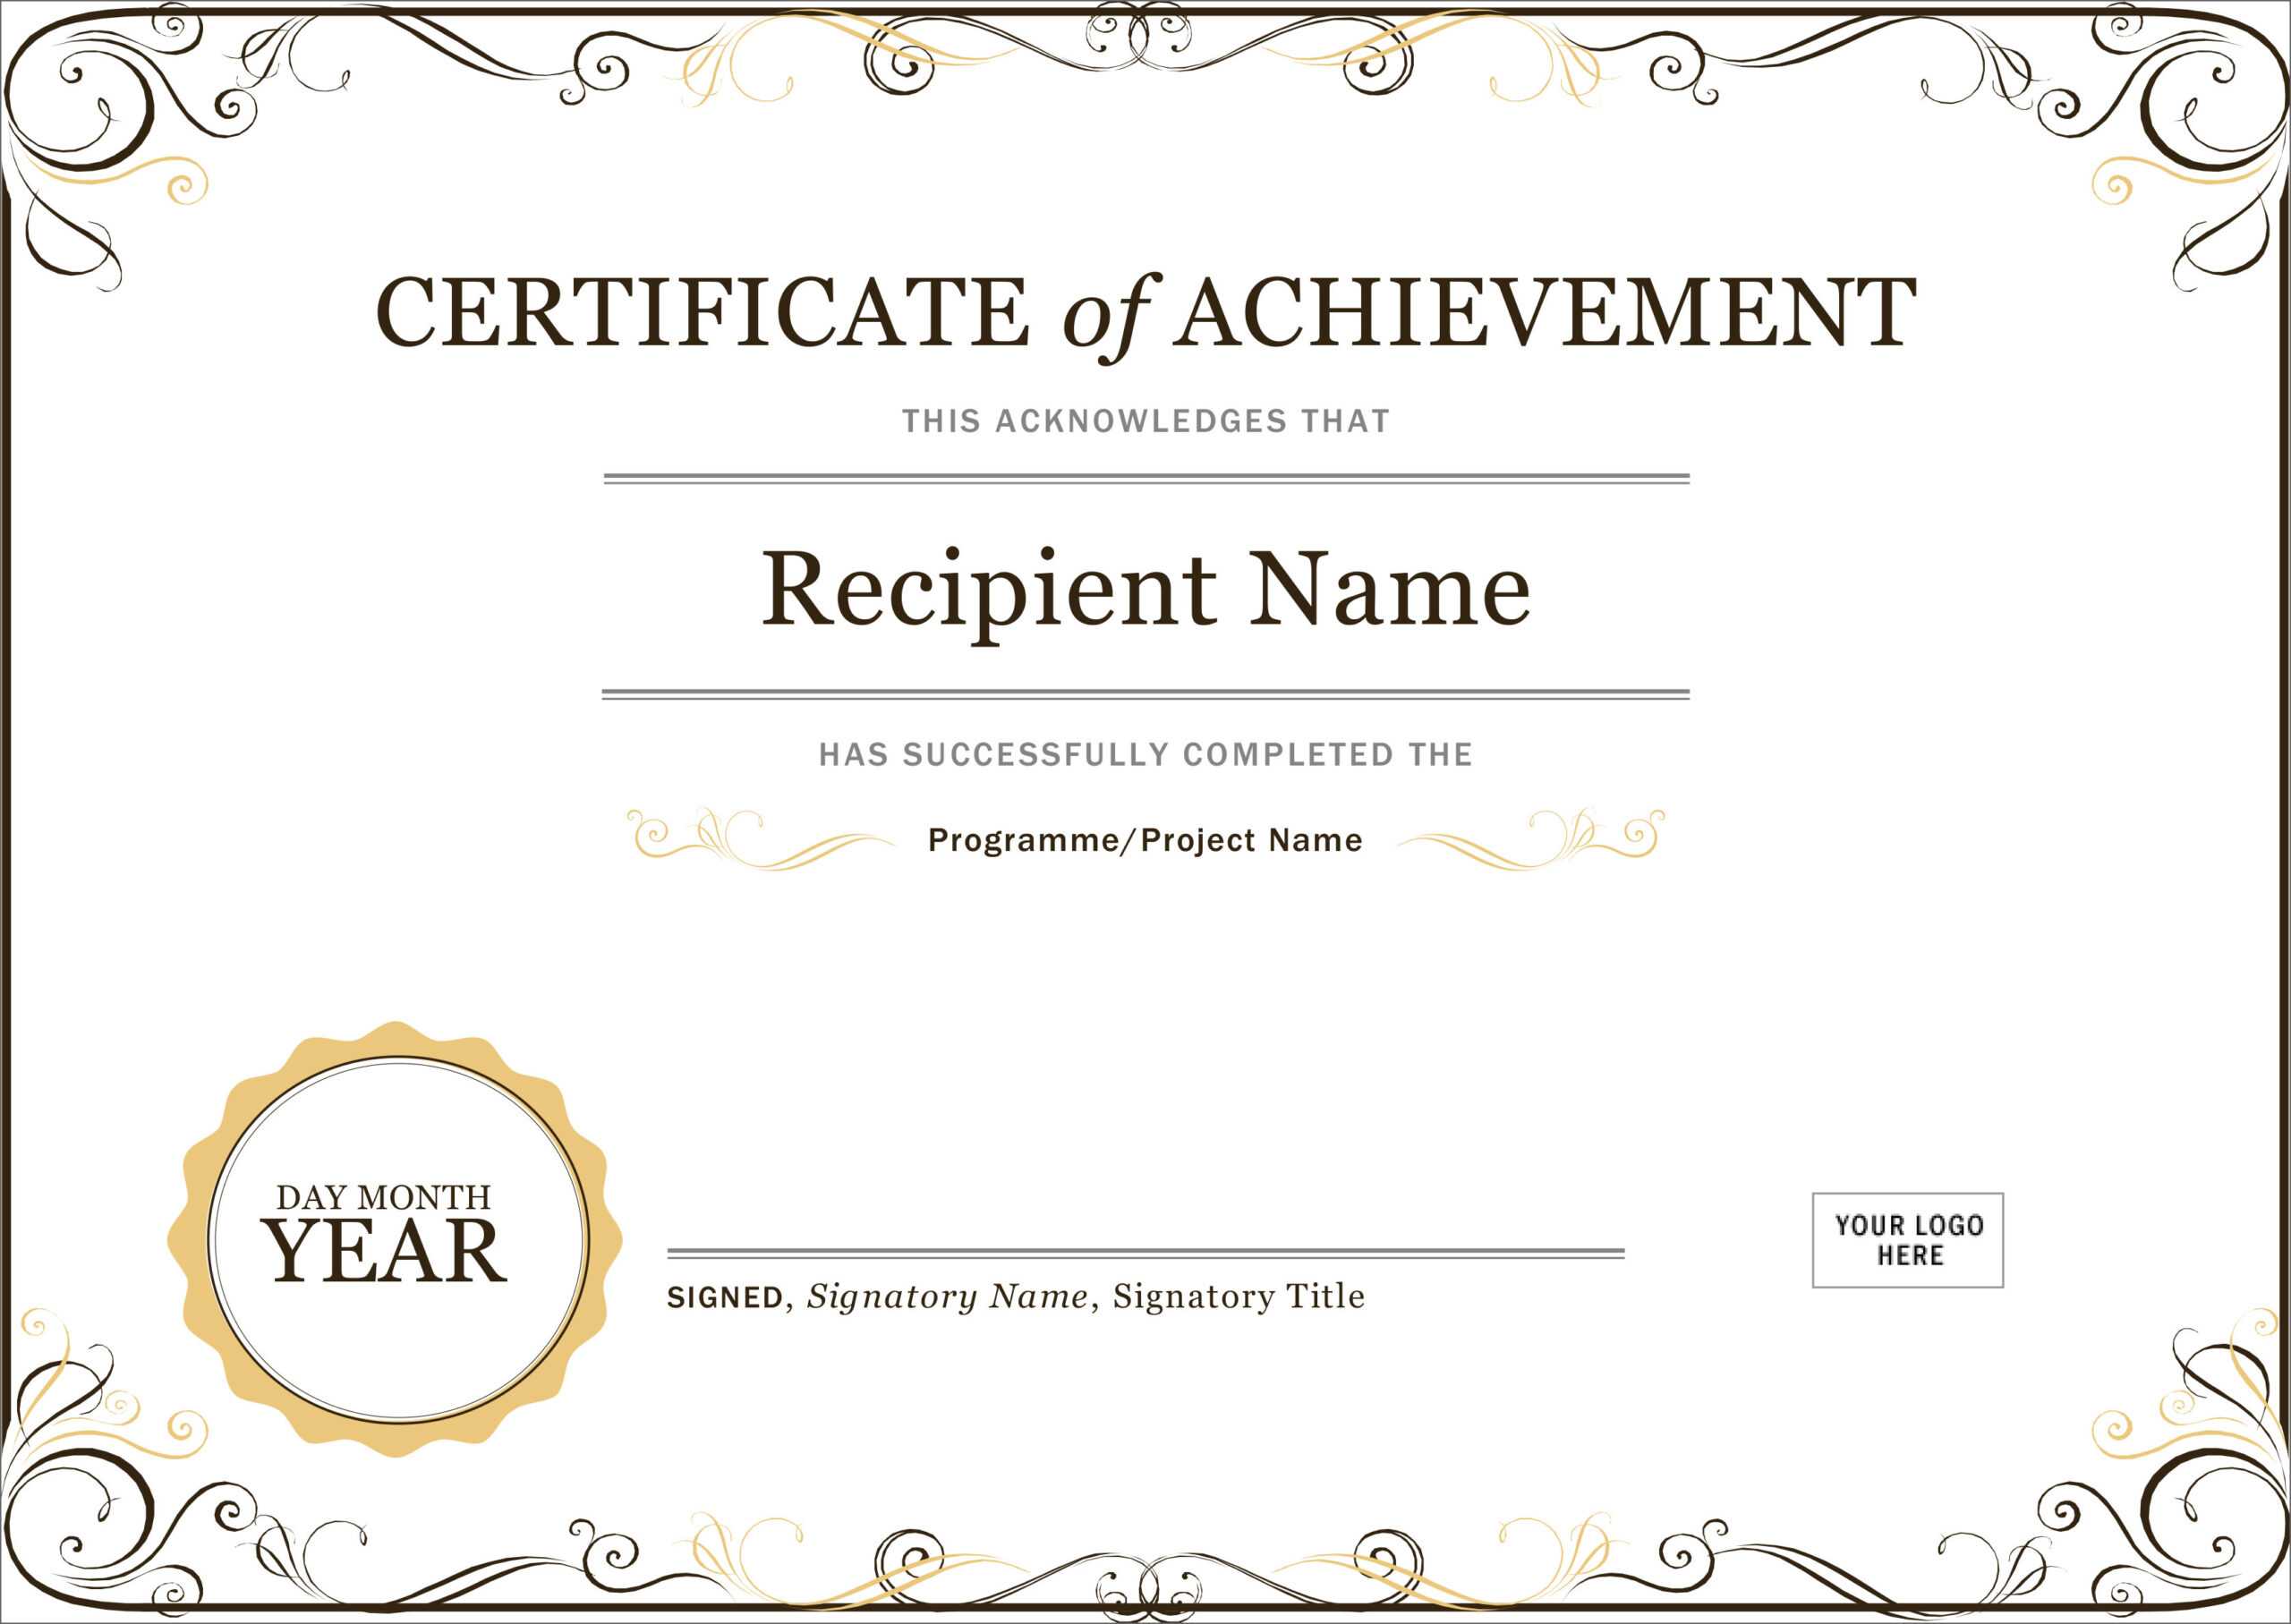 50 Free Creative Blank Certificate Templates In Psd Throughout Best Employee Award Certificate Templates